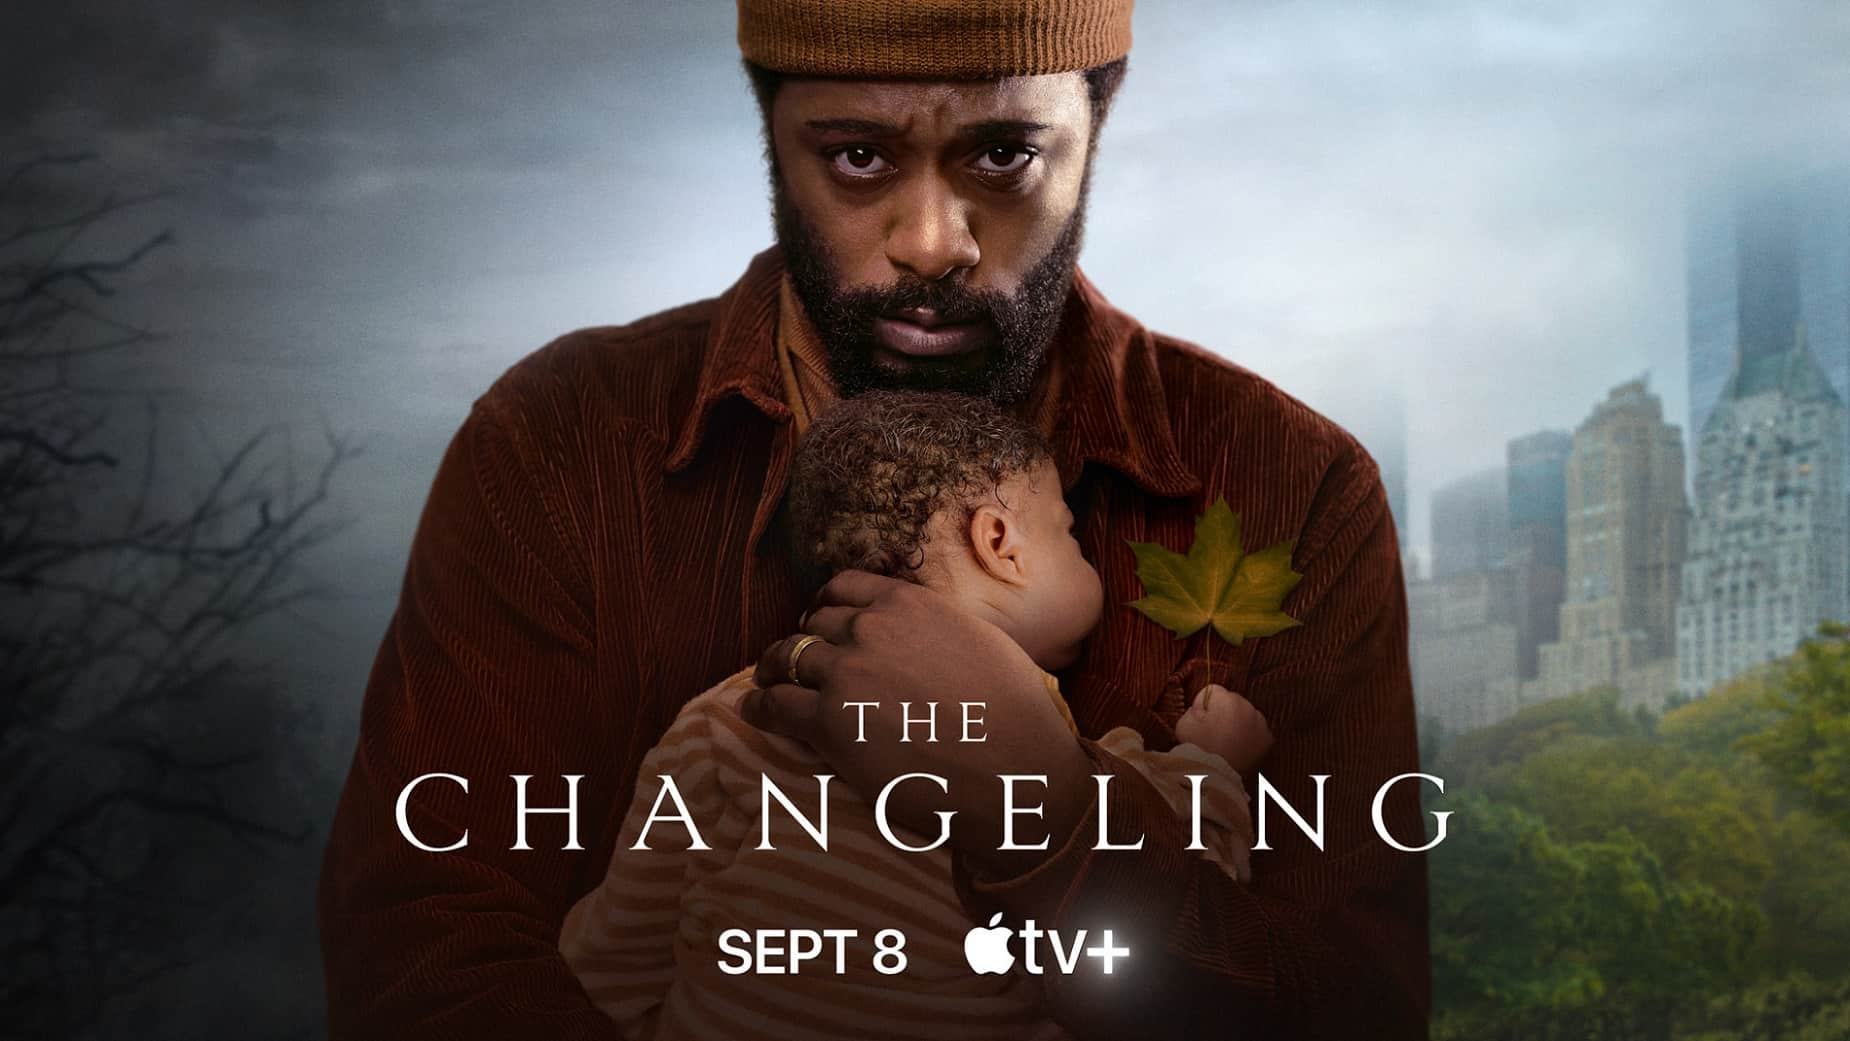 The Changeling (Credit- Apple TV+)